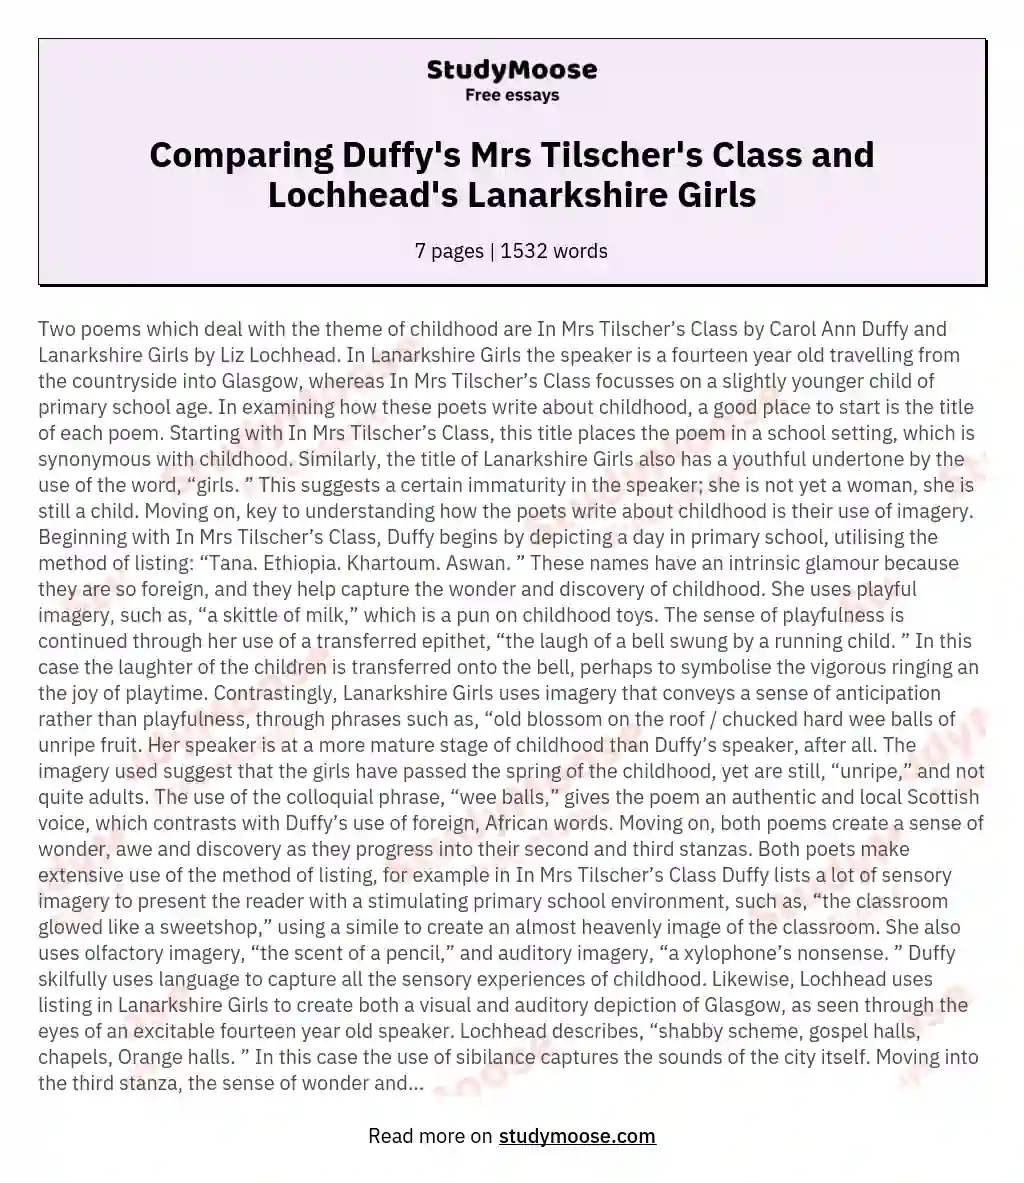 Compare and contrast two poems, In Mrs Tilscher’s Class by Carol Ann Duffy and Lanarkshire Girls by Liz Lochhea